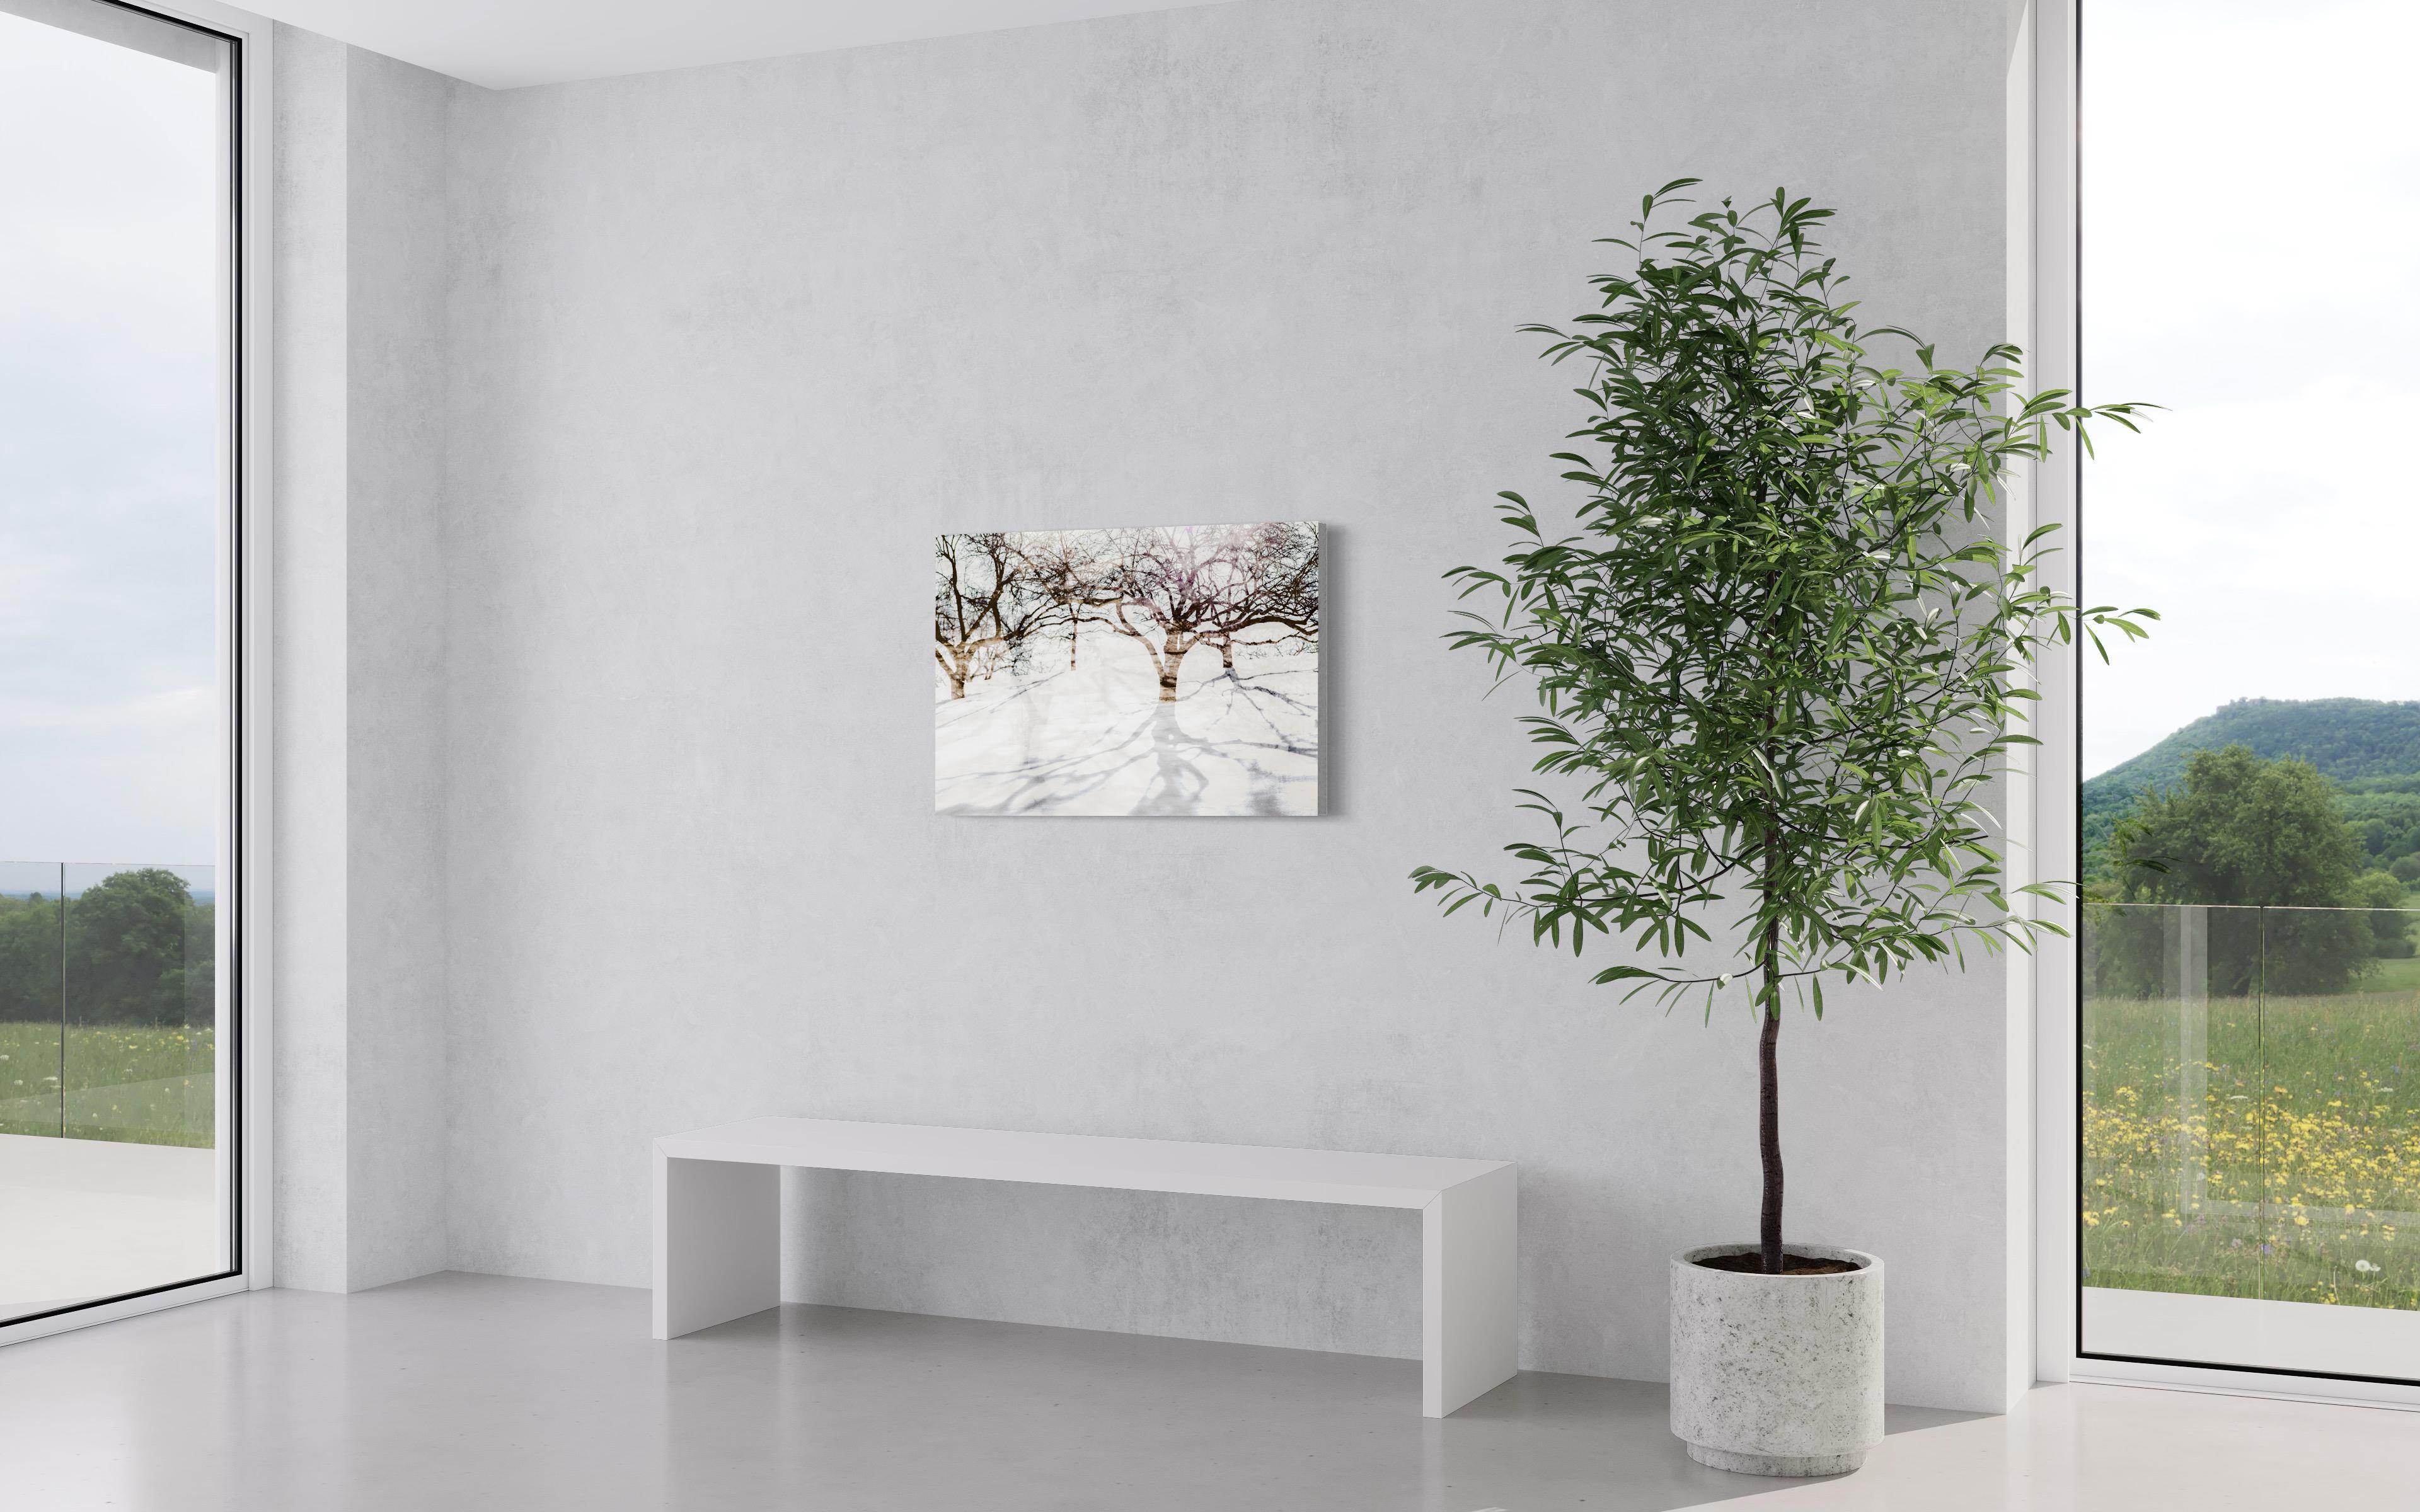 This abstracted landscape photograph by Tori Gagne captures an abstracted view of trees and features a white and brown umber palette. An edition size of 25, this photograph is available as a metal sublimation print with a 1.3” deep silver flush